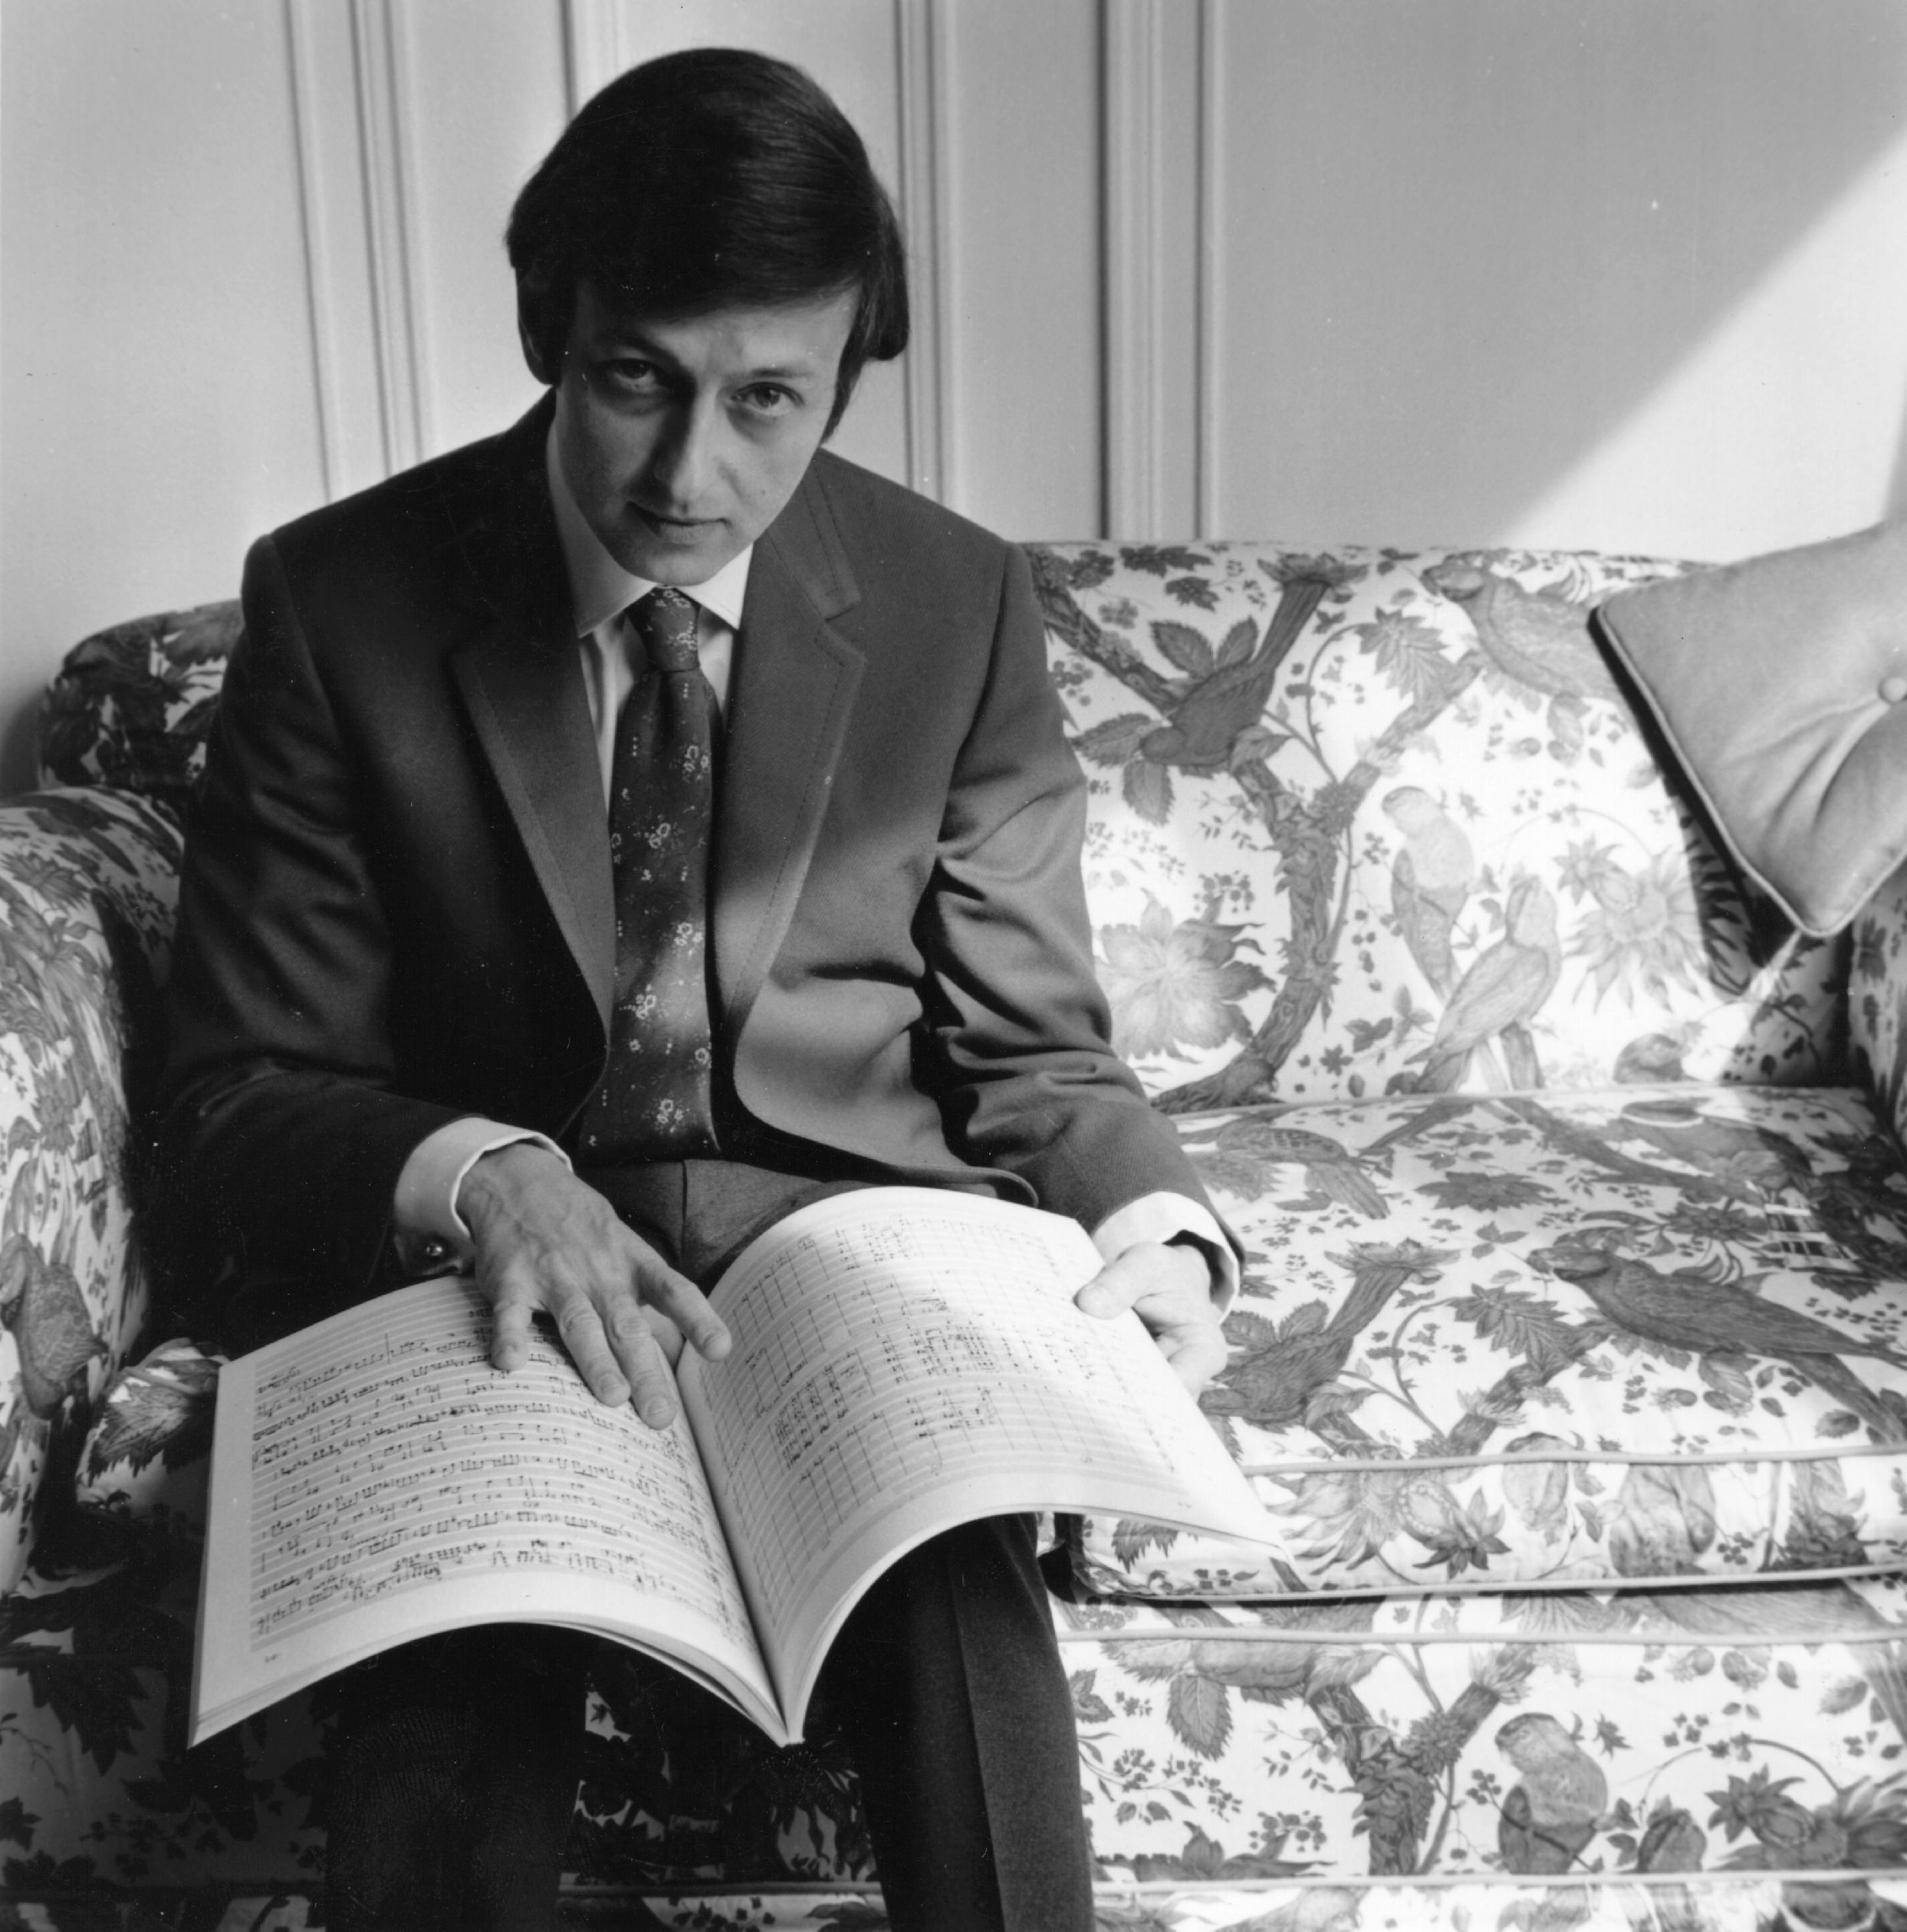 A young André Previn at the Savoy Hotel in London | Photo: Getty Images